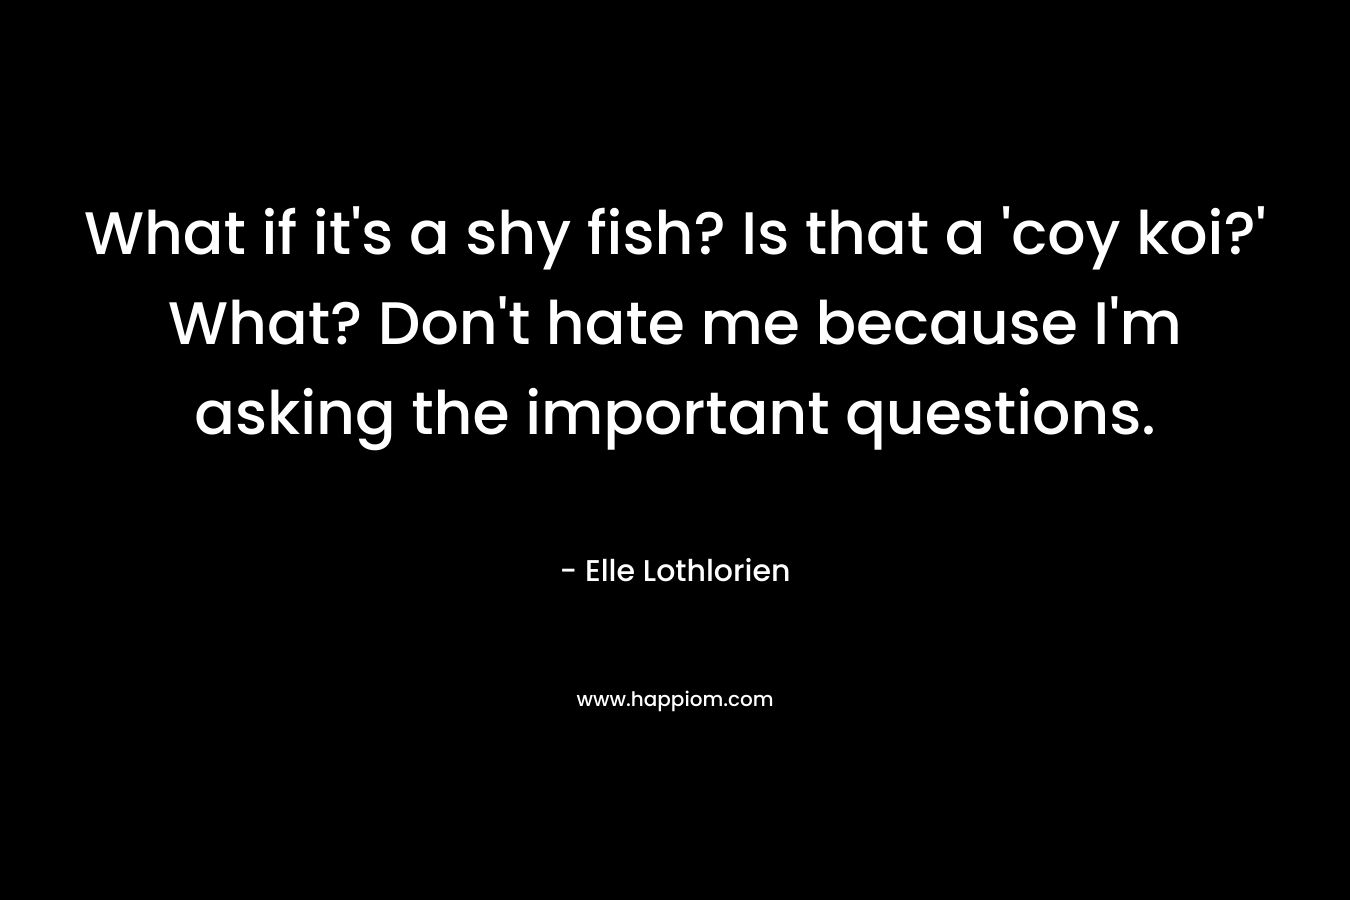 What if it's a shy fish? Is that a 'coy koi?' What? Don't hate me because I'm asking the important questions.